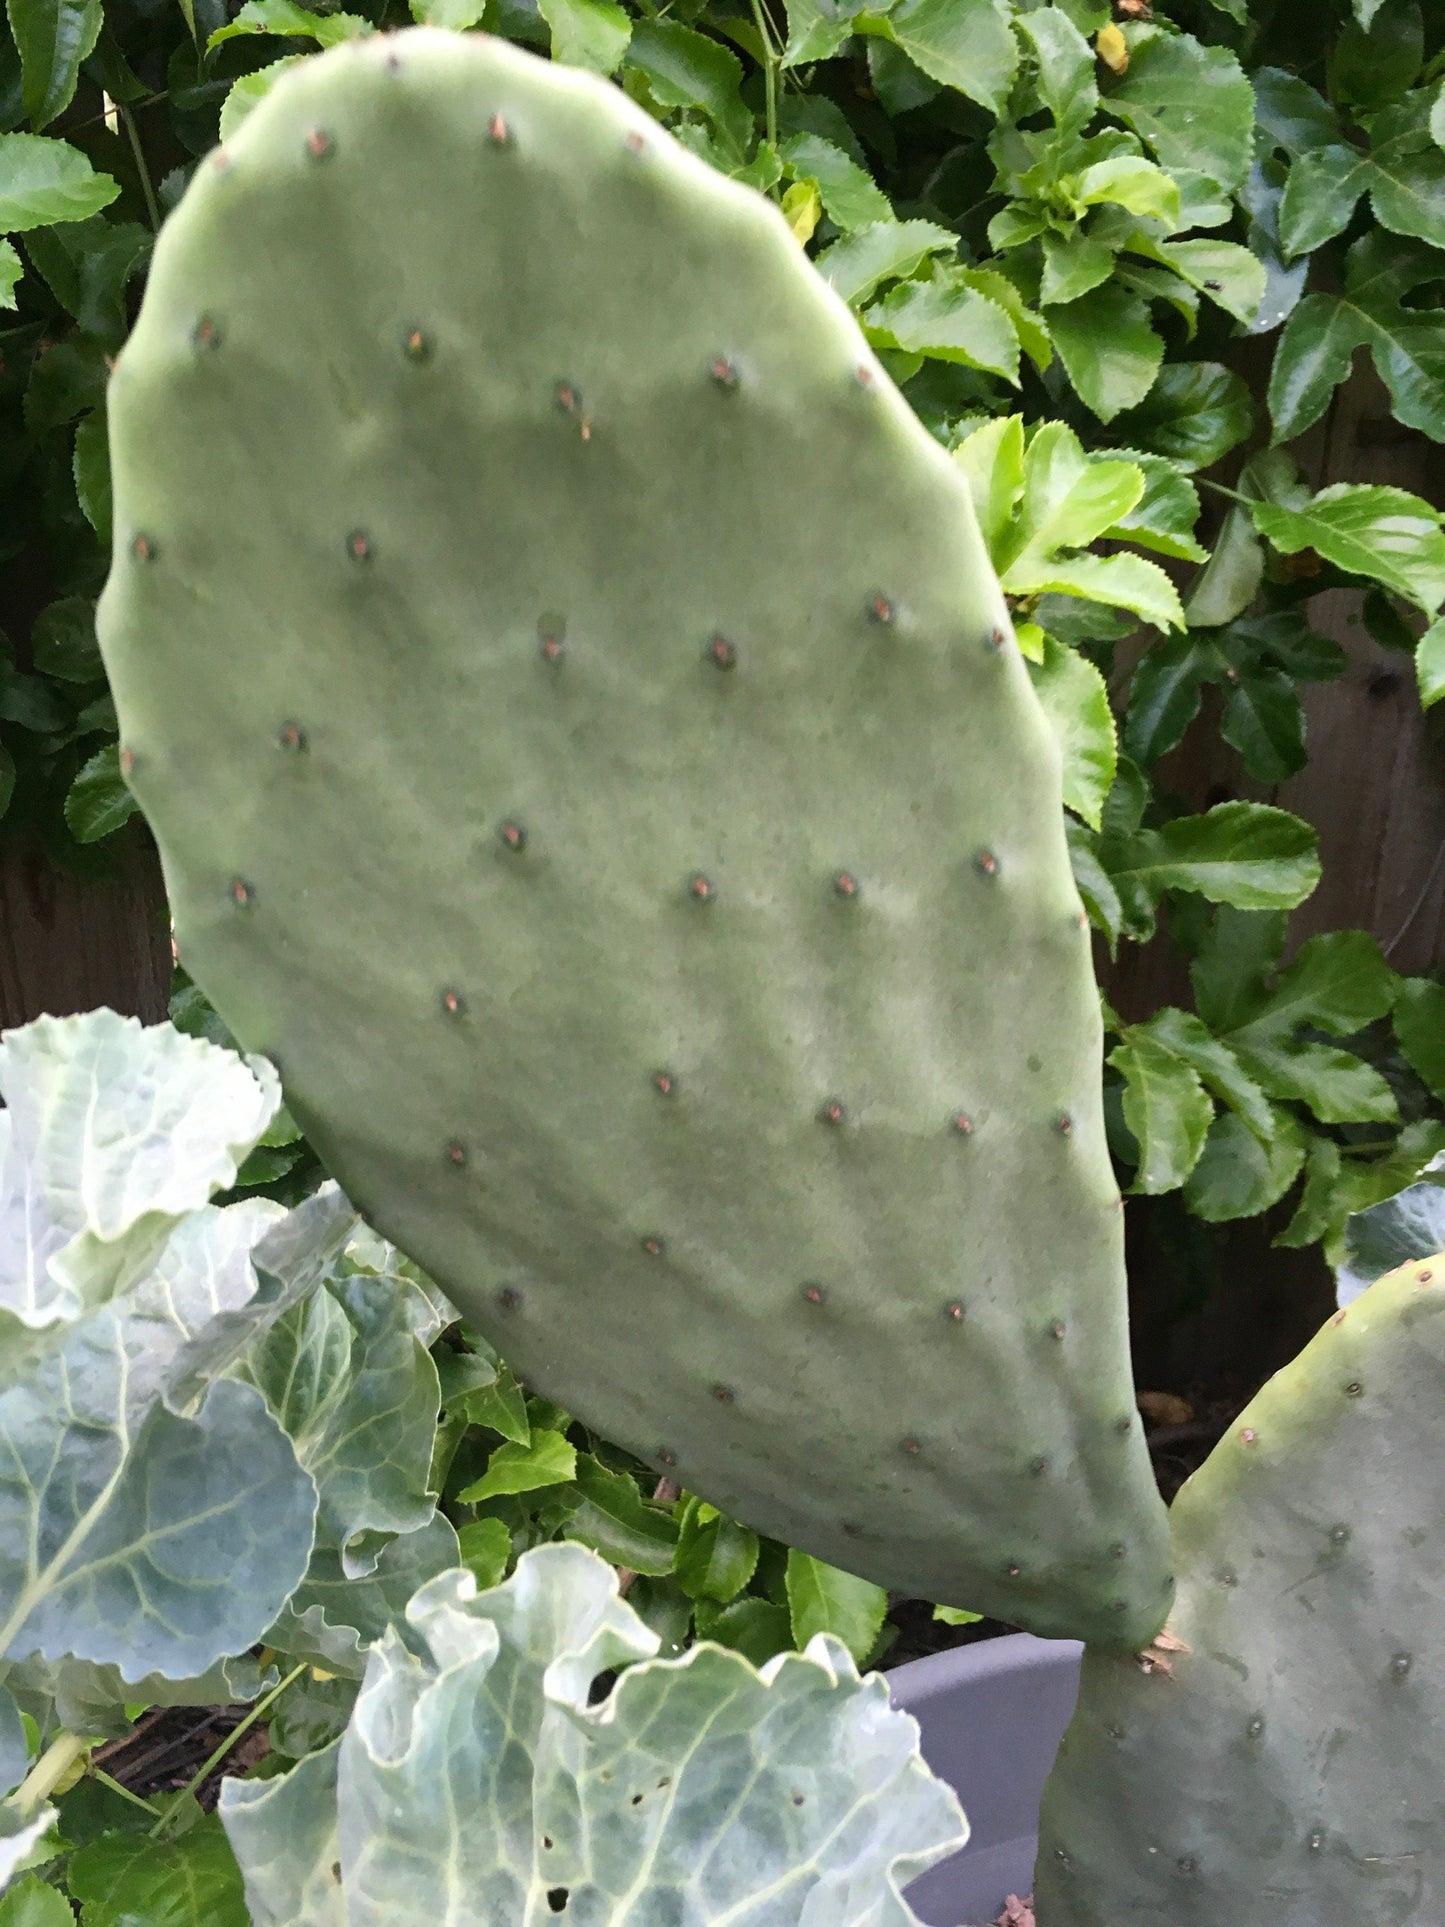 Large Spineless Edible Nopales Prickly Pear Cactus Pads | Opuntia Cacanapa